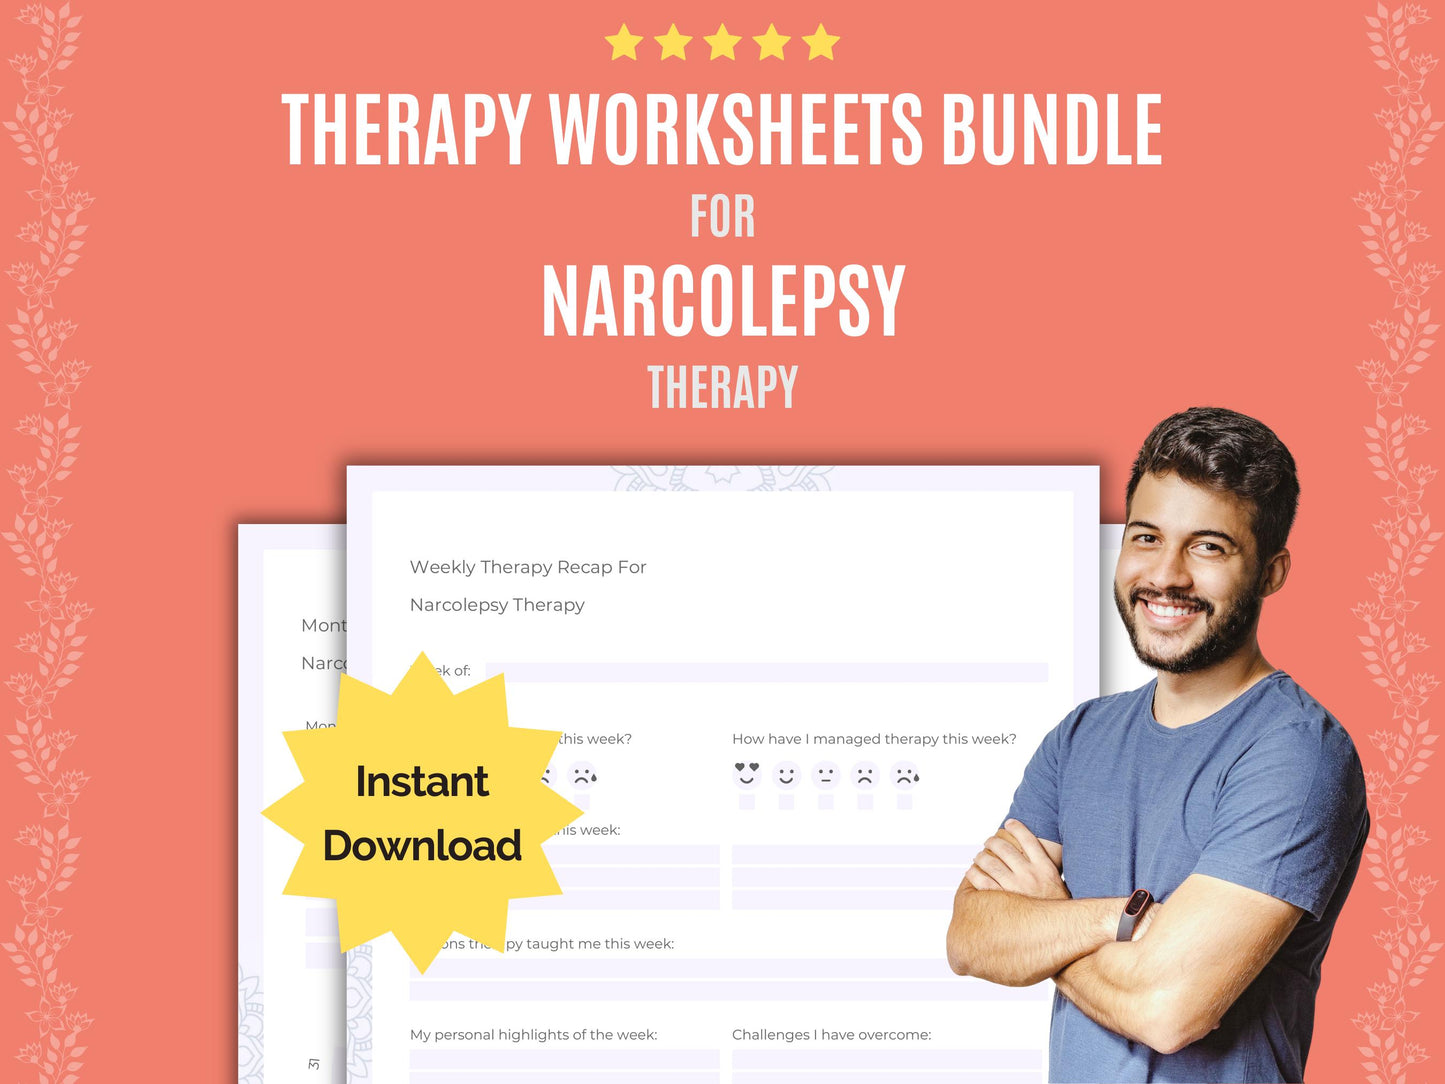 Narcolepsy Tools, Narcolepsy Notes, Narcolepsy Planners, Narcolepsy Resources, Narcolepsy Workbooks, Narcolepsy Templates, Cheat Sheet, Narcolepsy Journals, Counseling, Narcolepsy Therapy, Journaling, Goal Setting